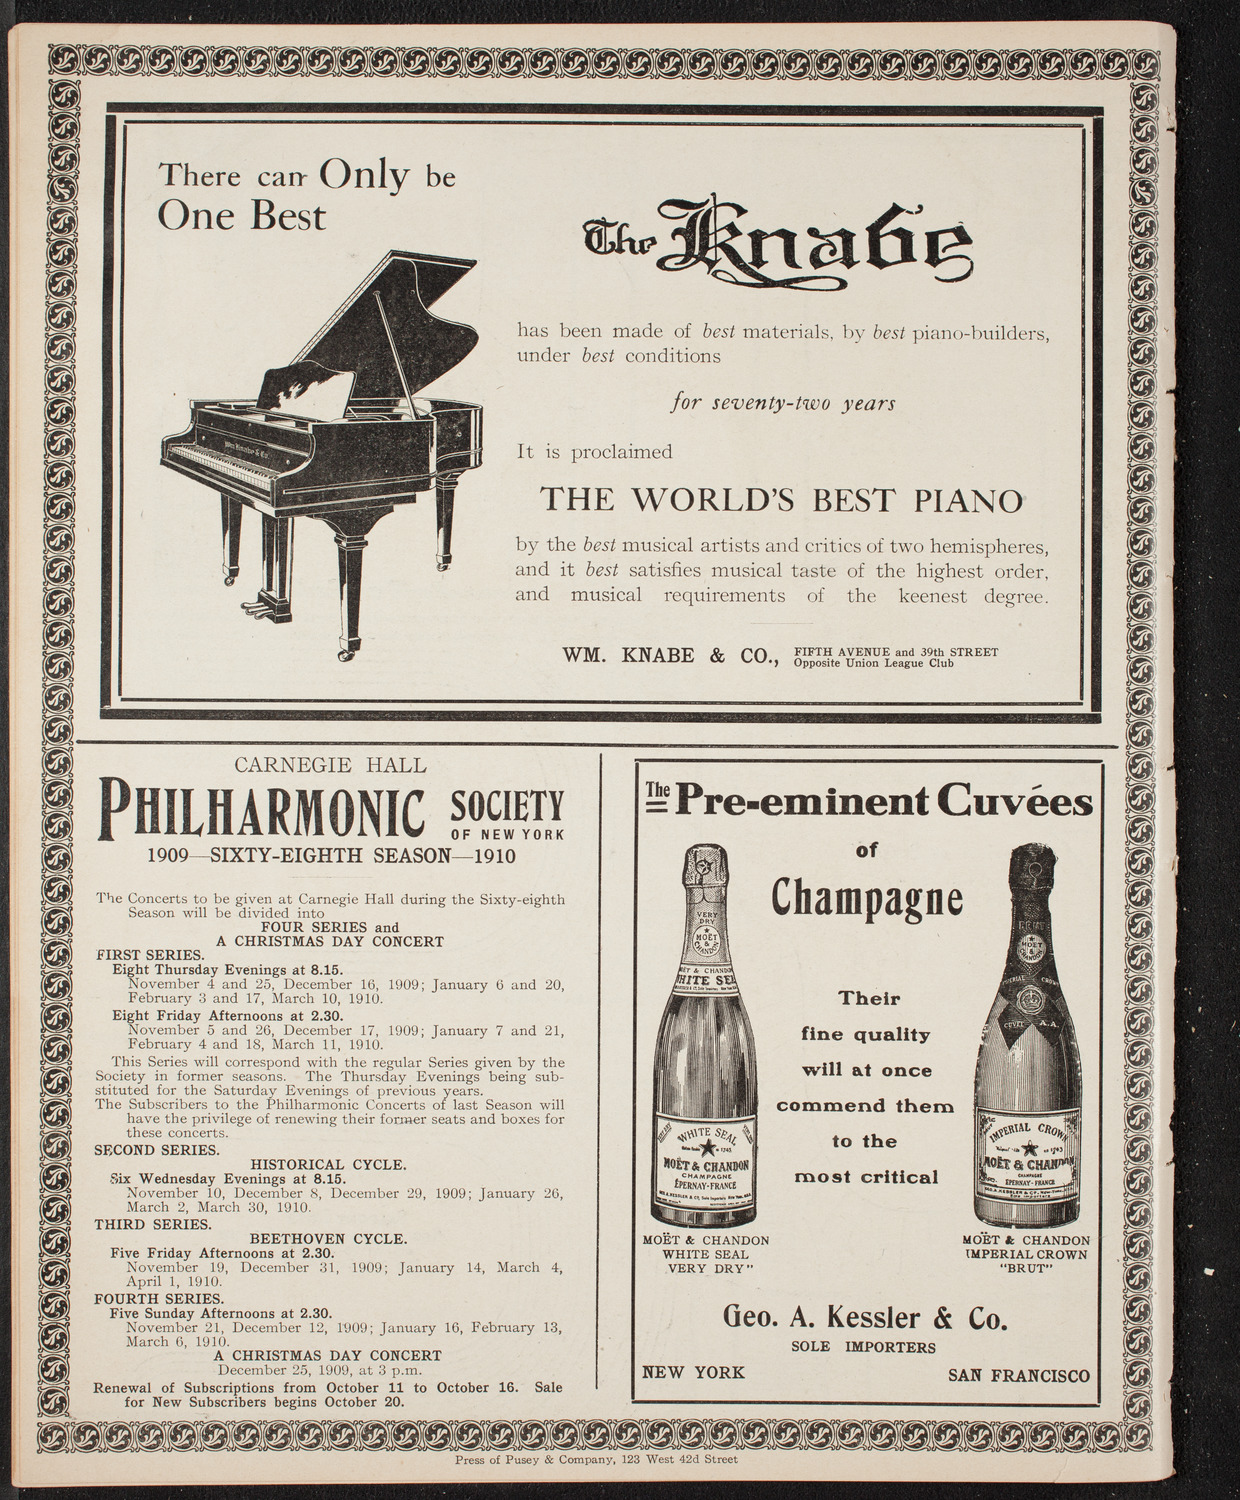 Lecture by R.G. Knowles, October 24, 1909, program page 12